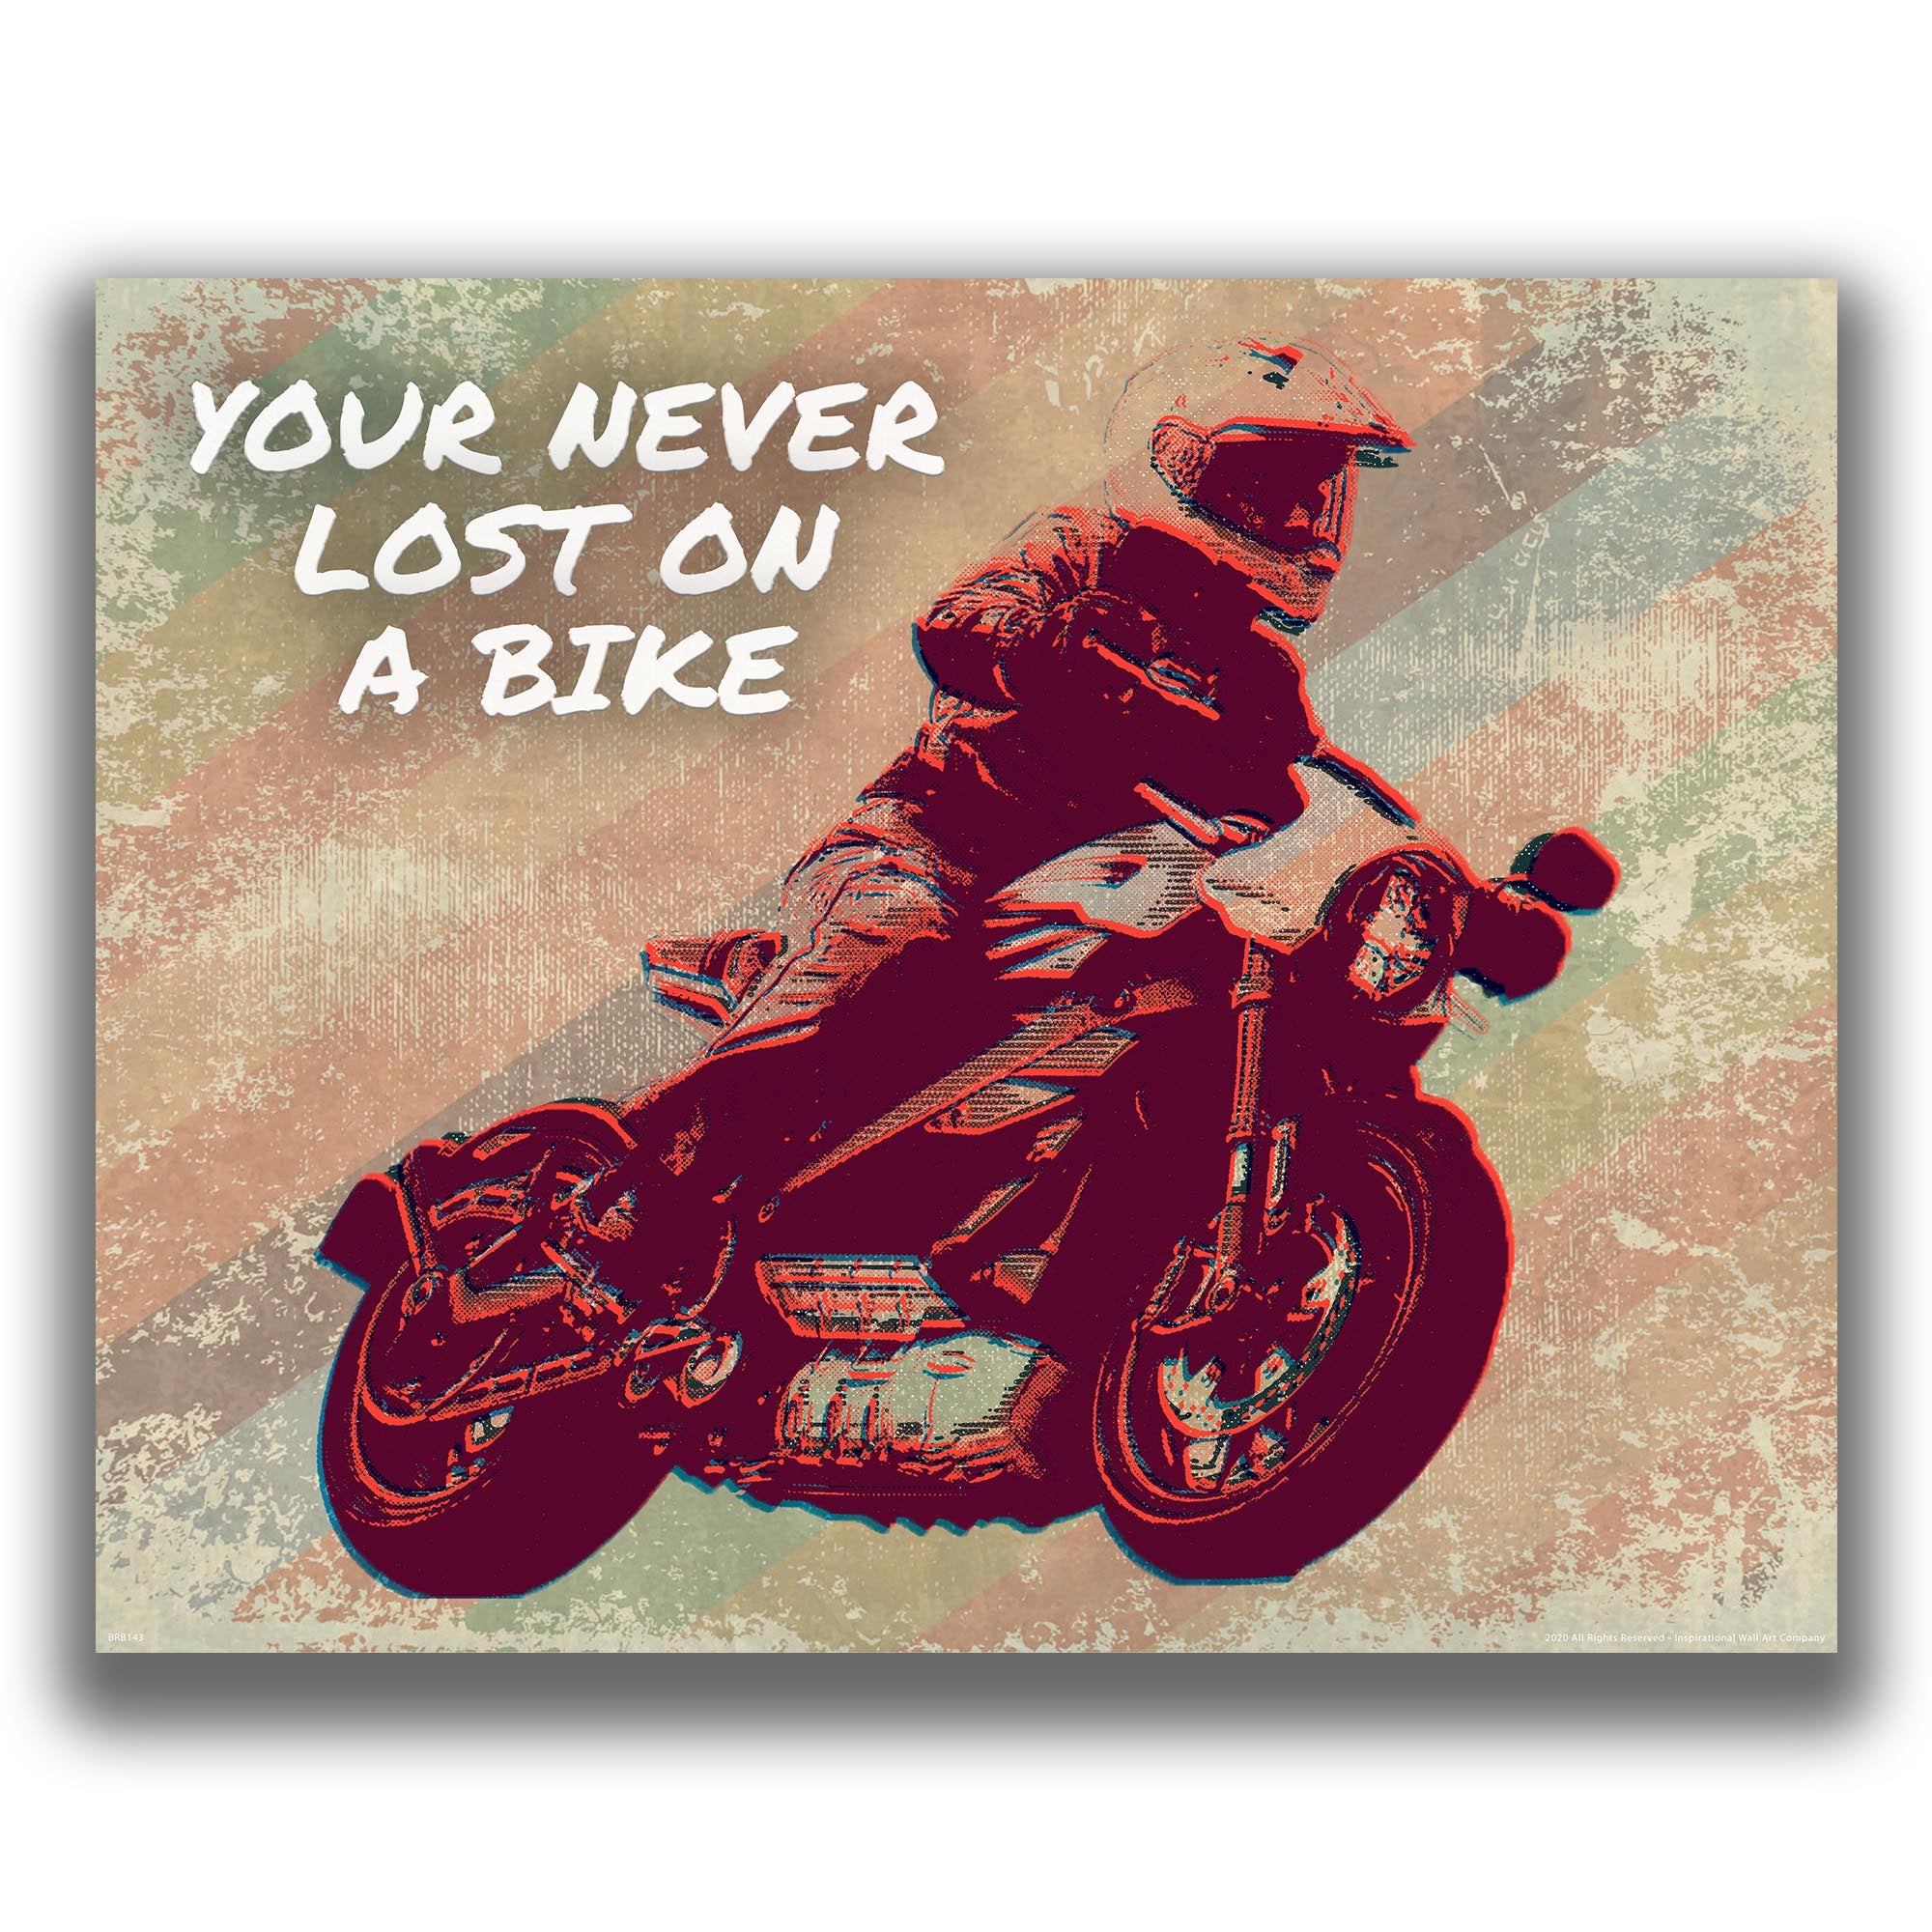 Your Never Lost on a Bike - Motorcycle Poster